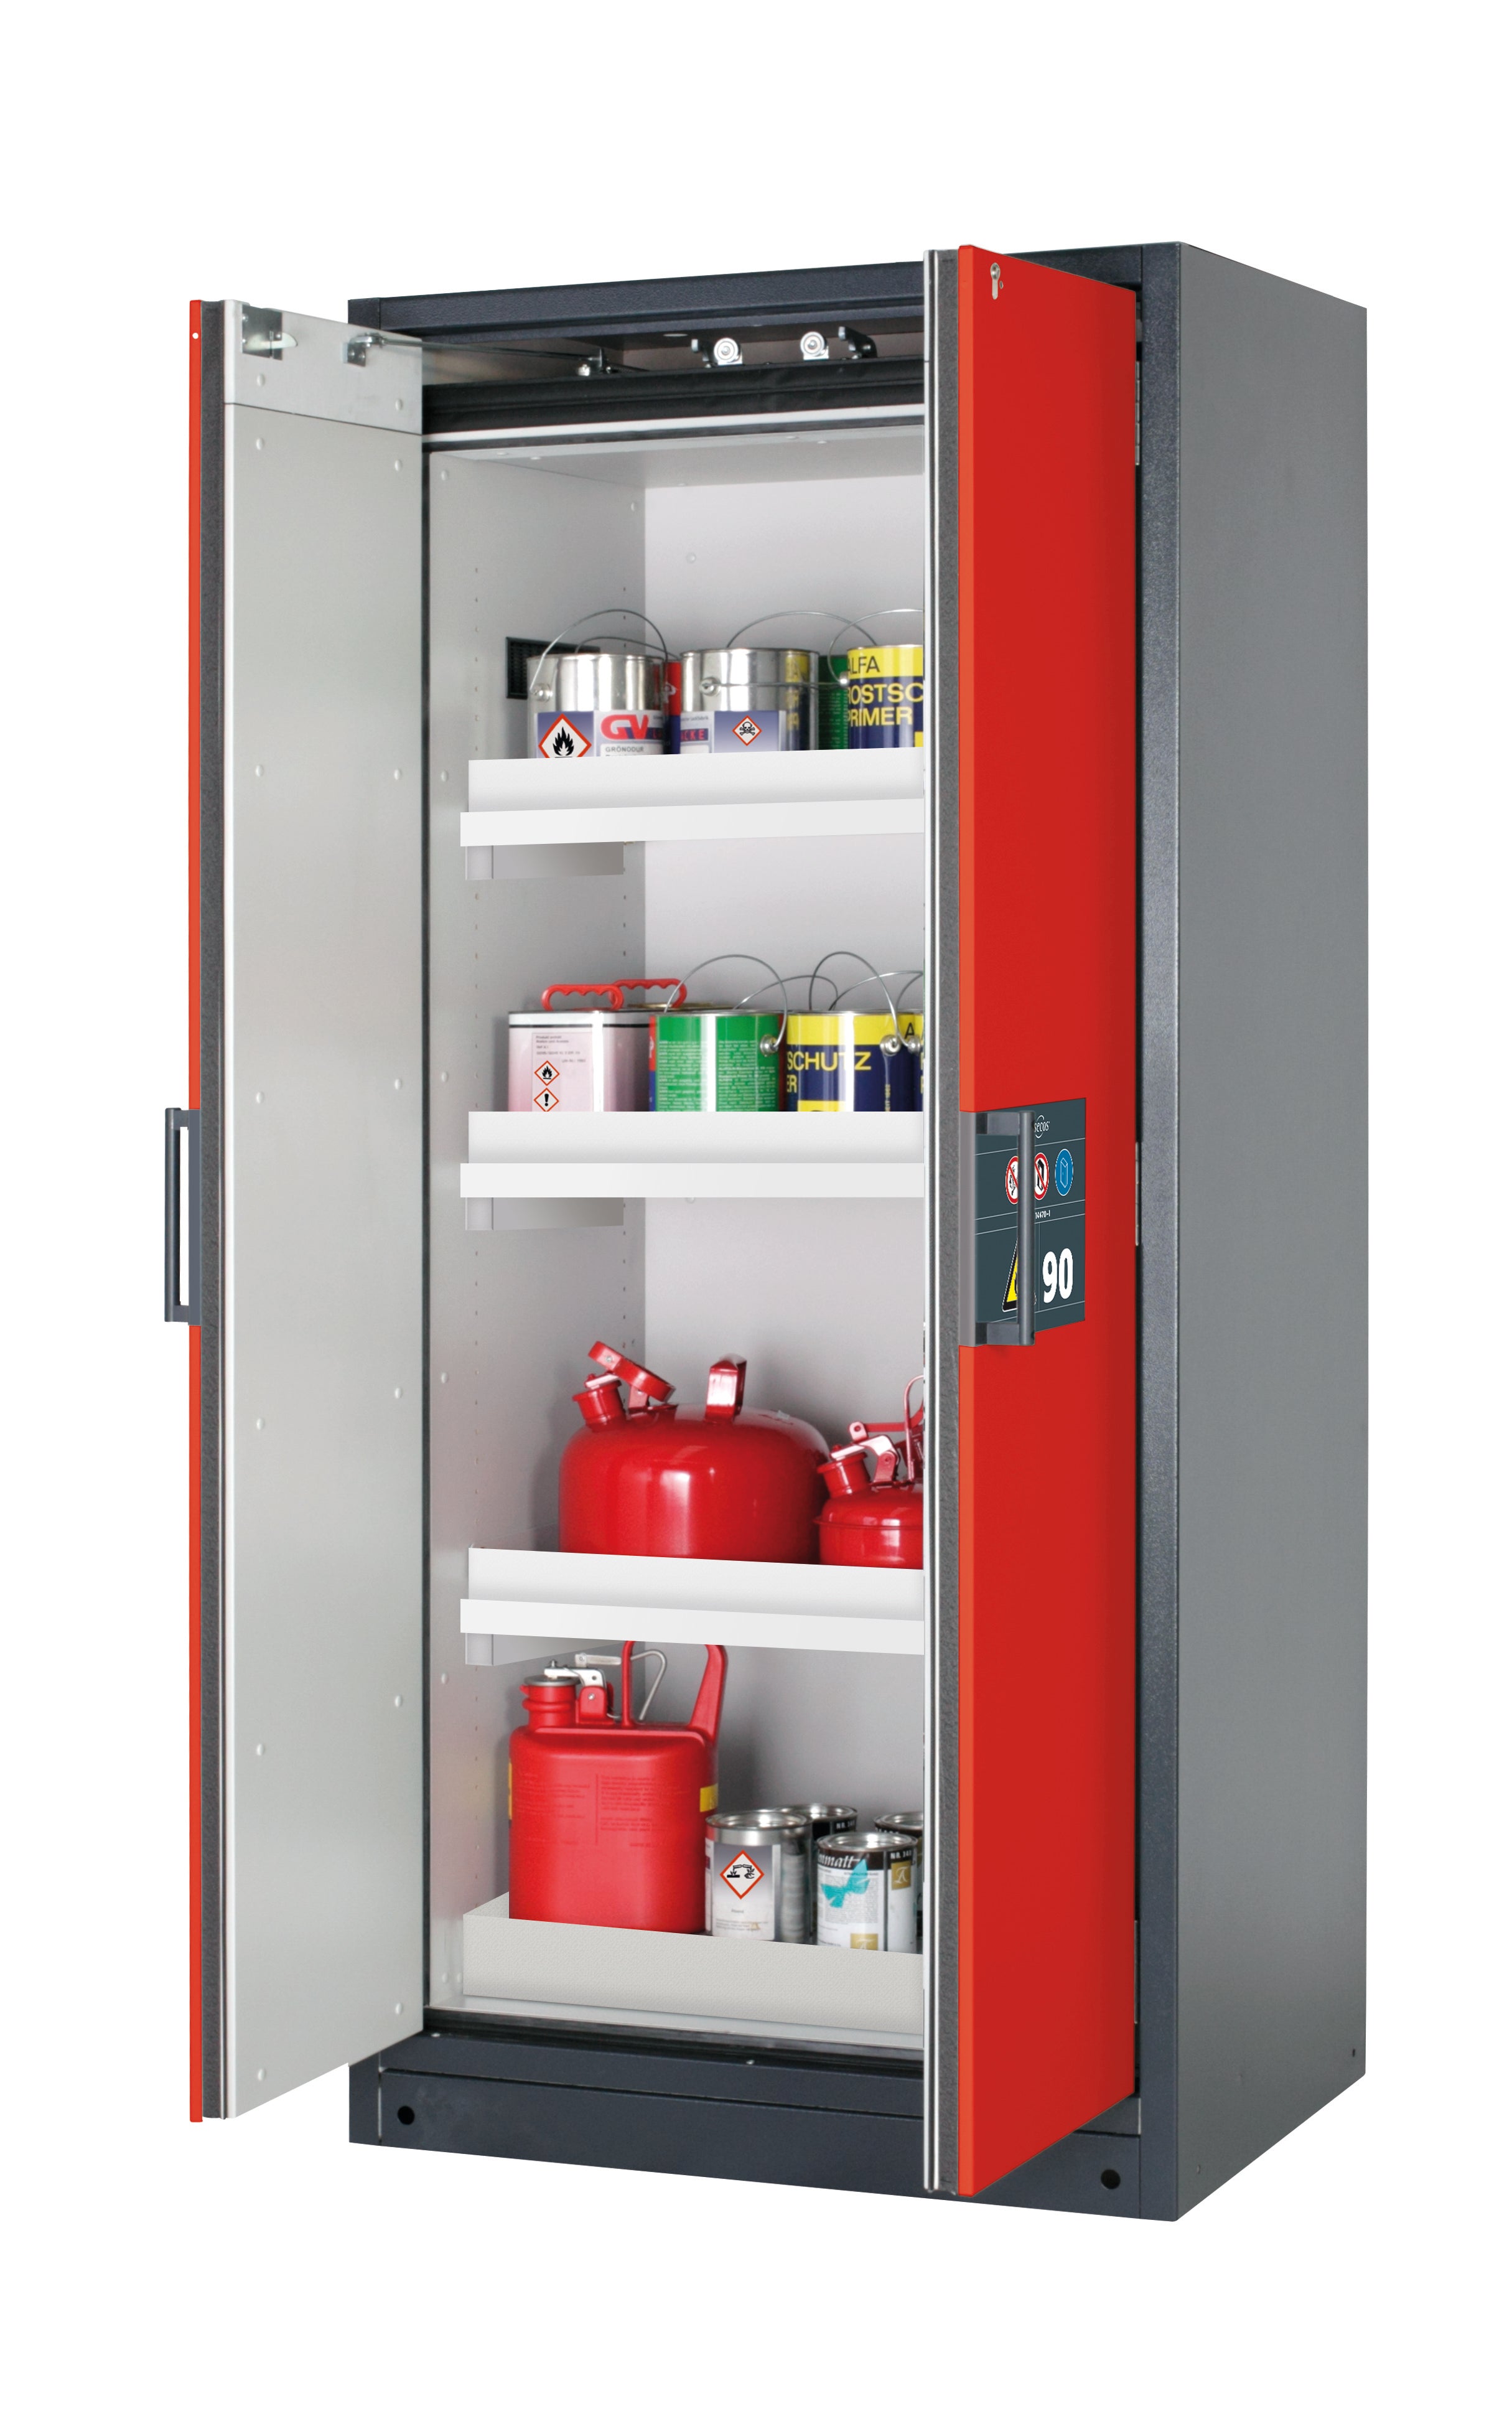 Type 90 safety storage cabinet Q-CLASSIC-90 model Q90.195.090 in traffic red RAL 3020 with 3x tray shelf (standard) (polypropylene),